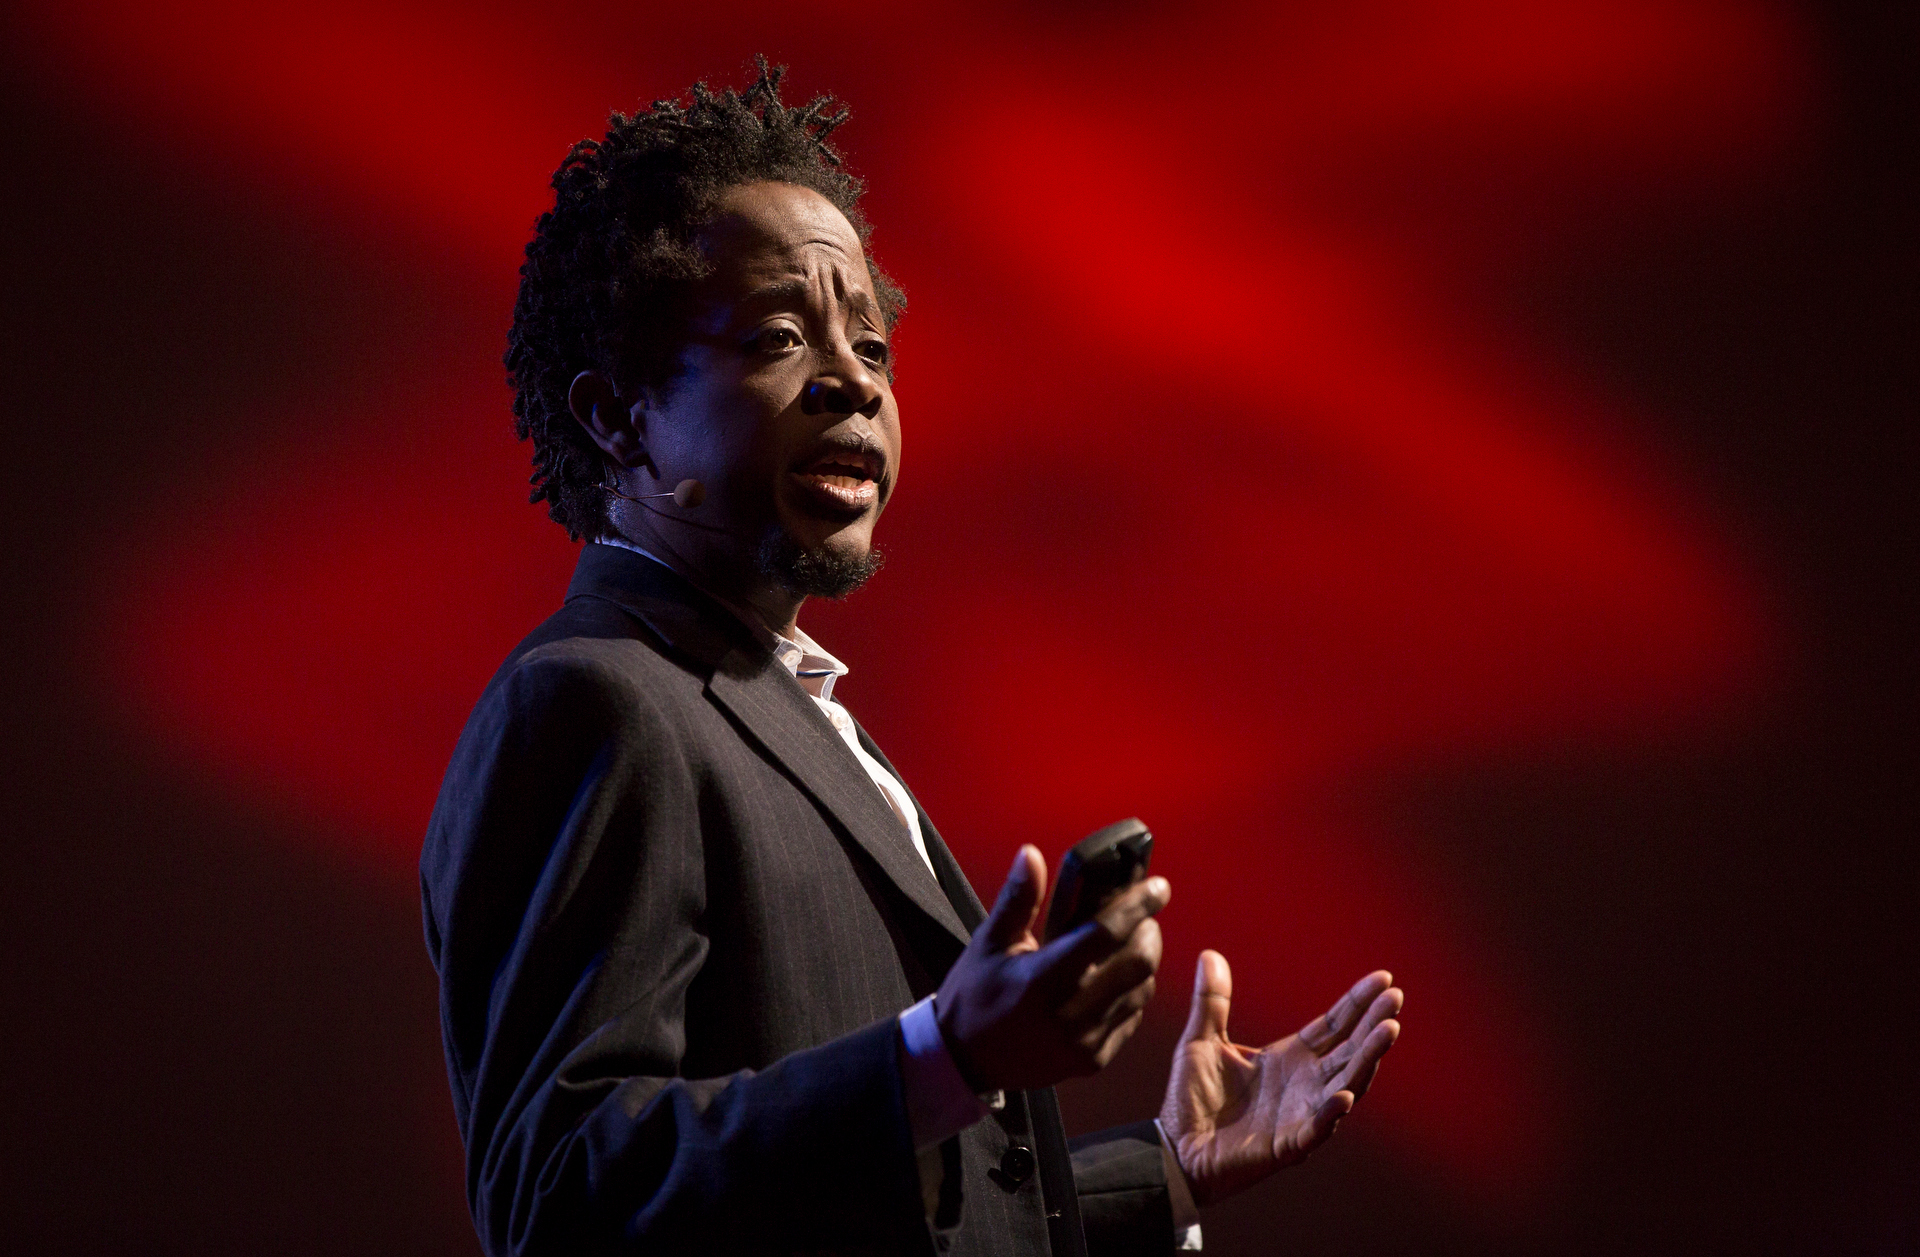 Rich Benjamin speaks at TEDWomen2015 - Momentum, Session 2, May 28, 2015, Monterey Conference Center, Monterey, California, USA. Photo: Marla Aufmuth/TED